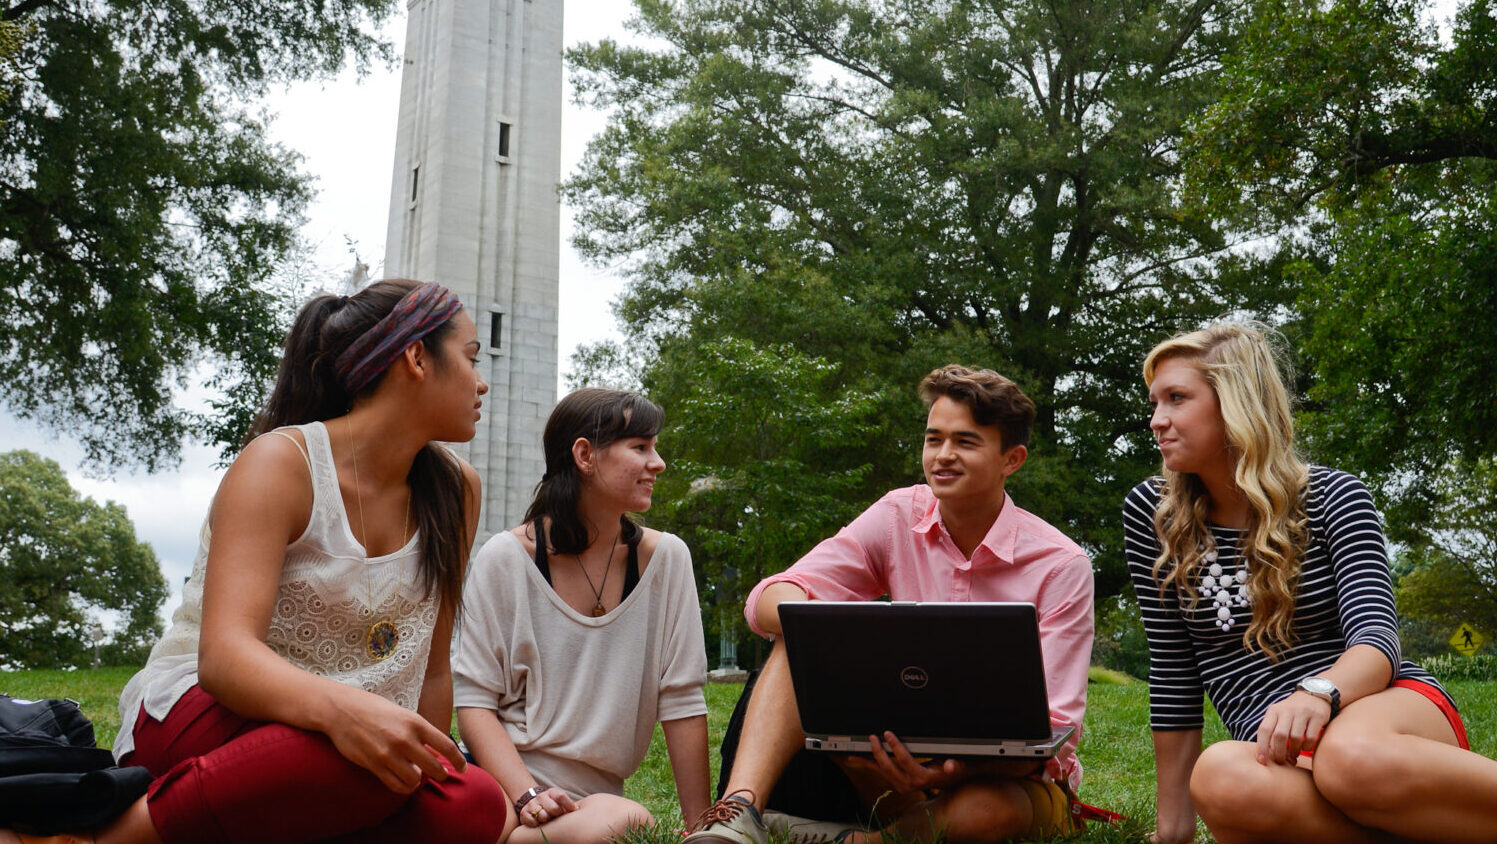 Students talk at the Belltower on campus